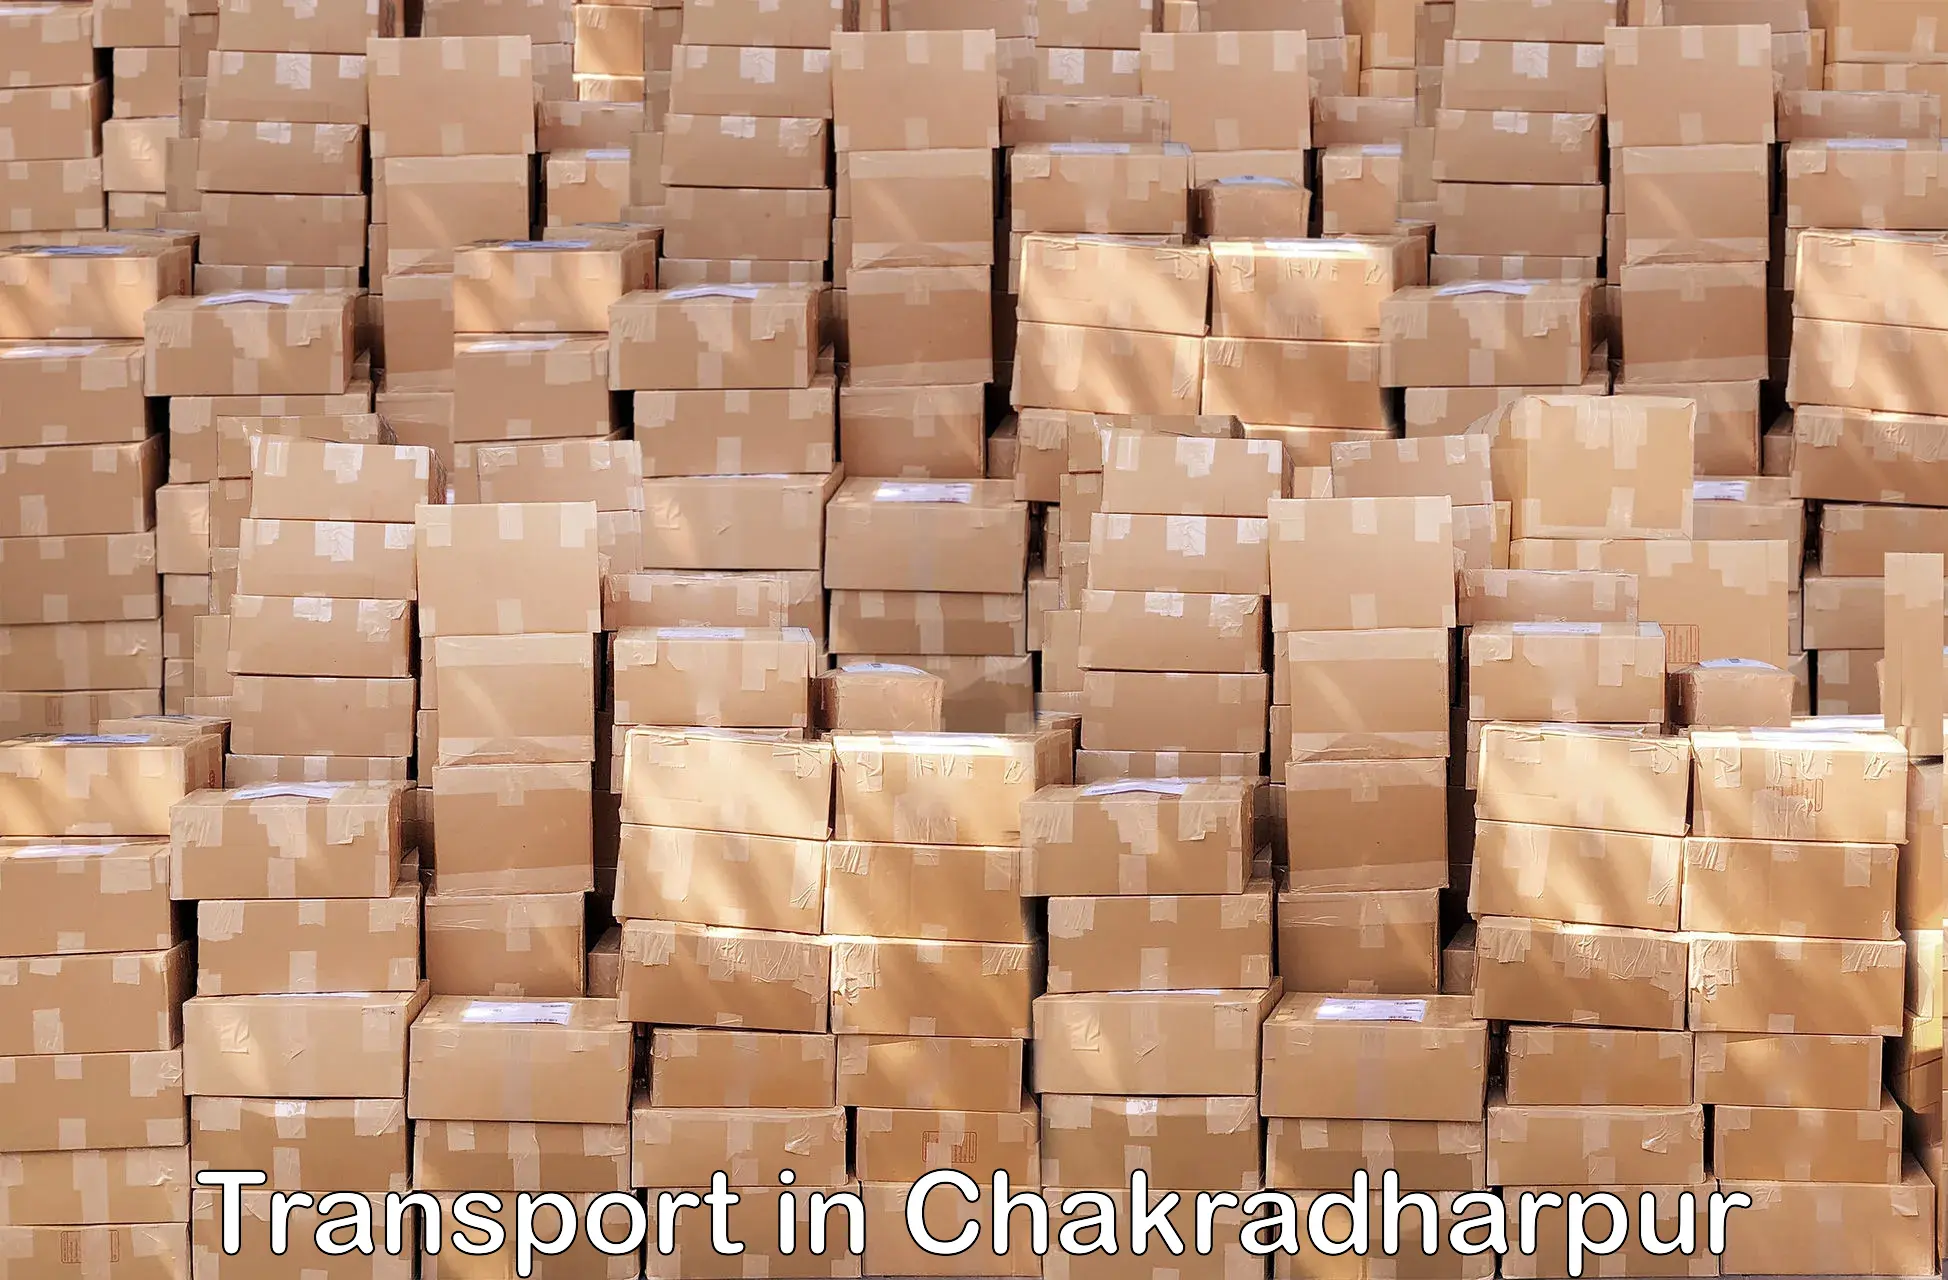 Air freight transport services in Chakradharpur